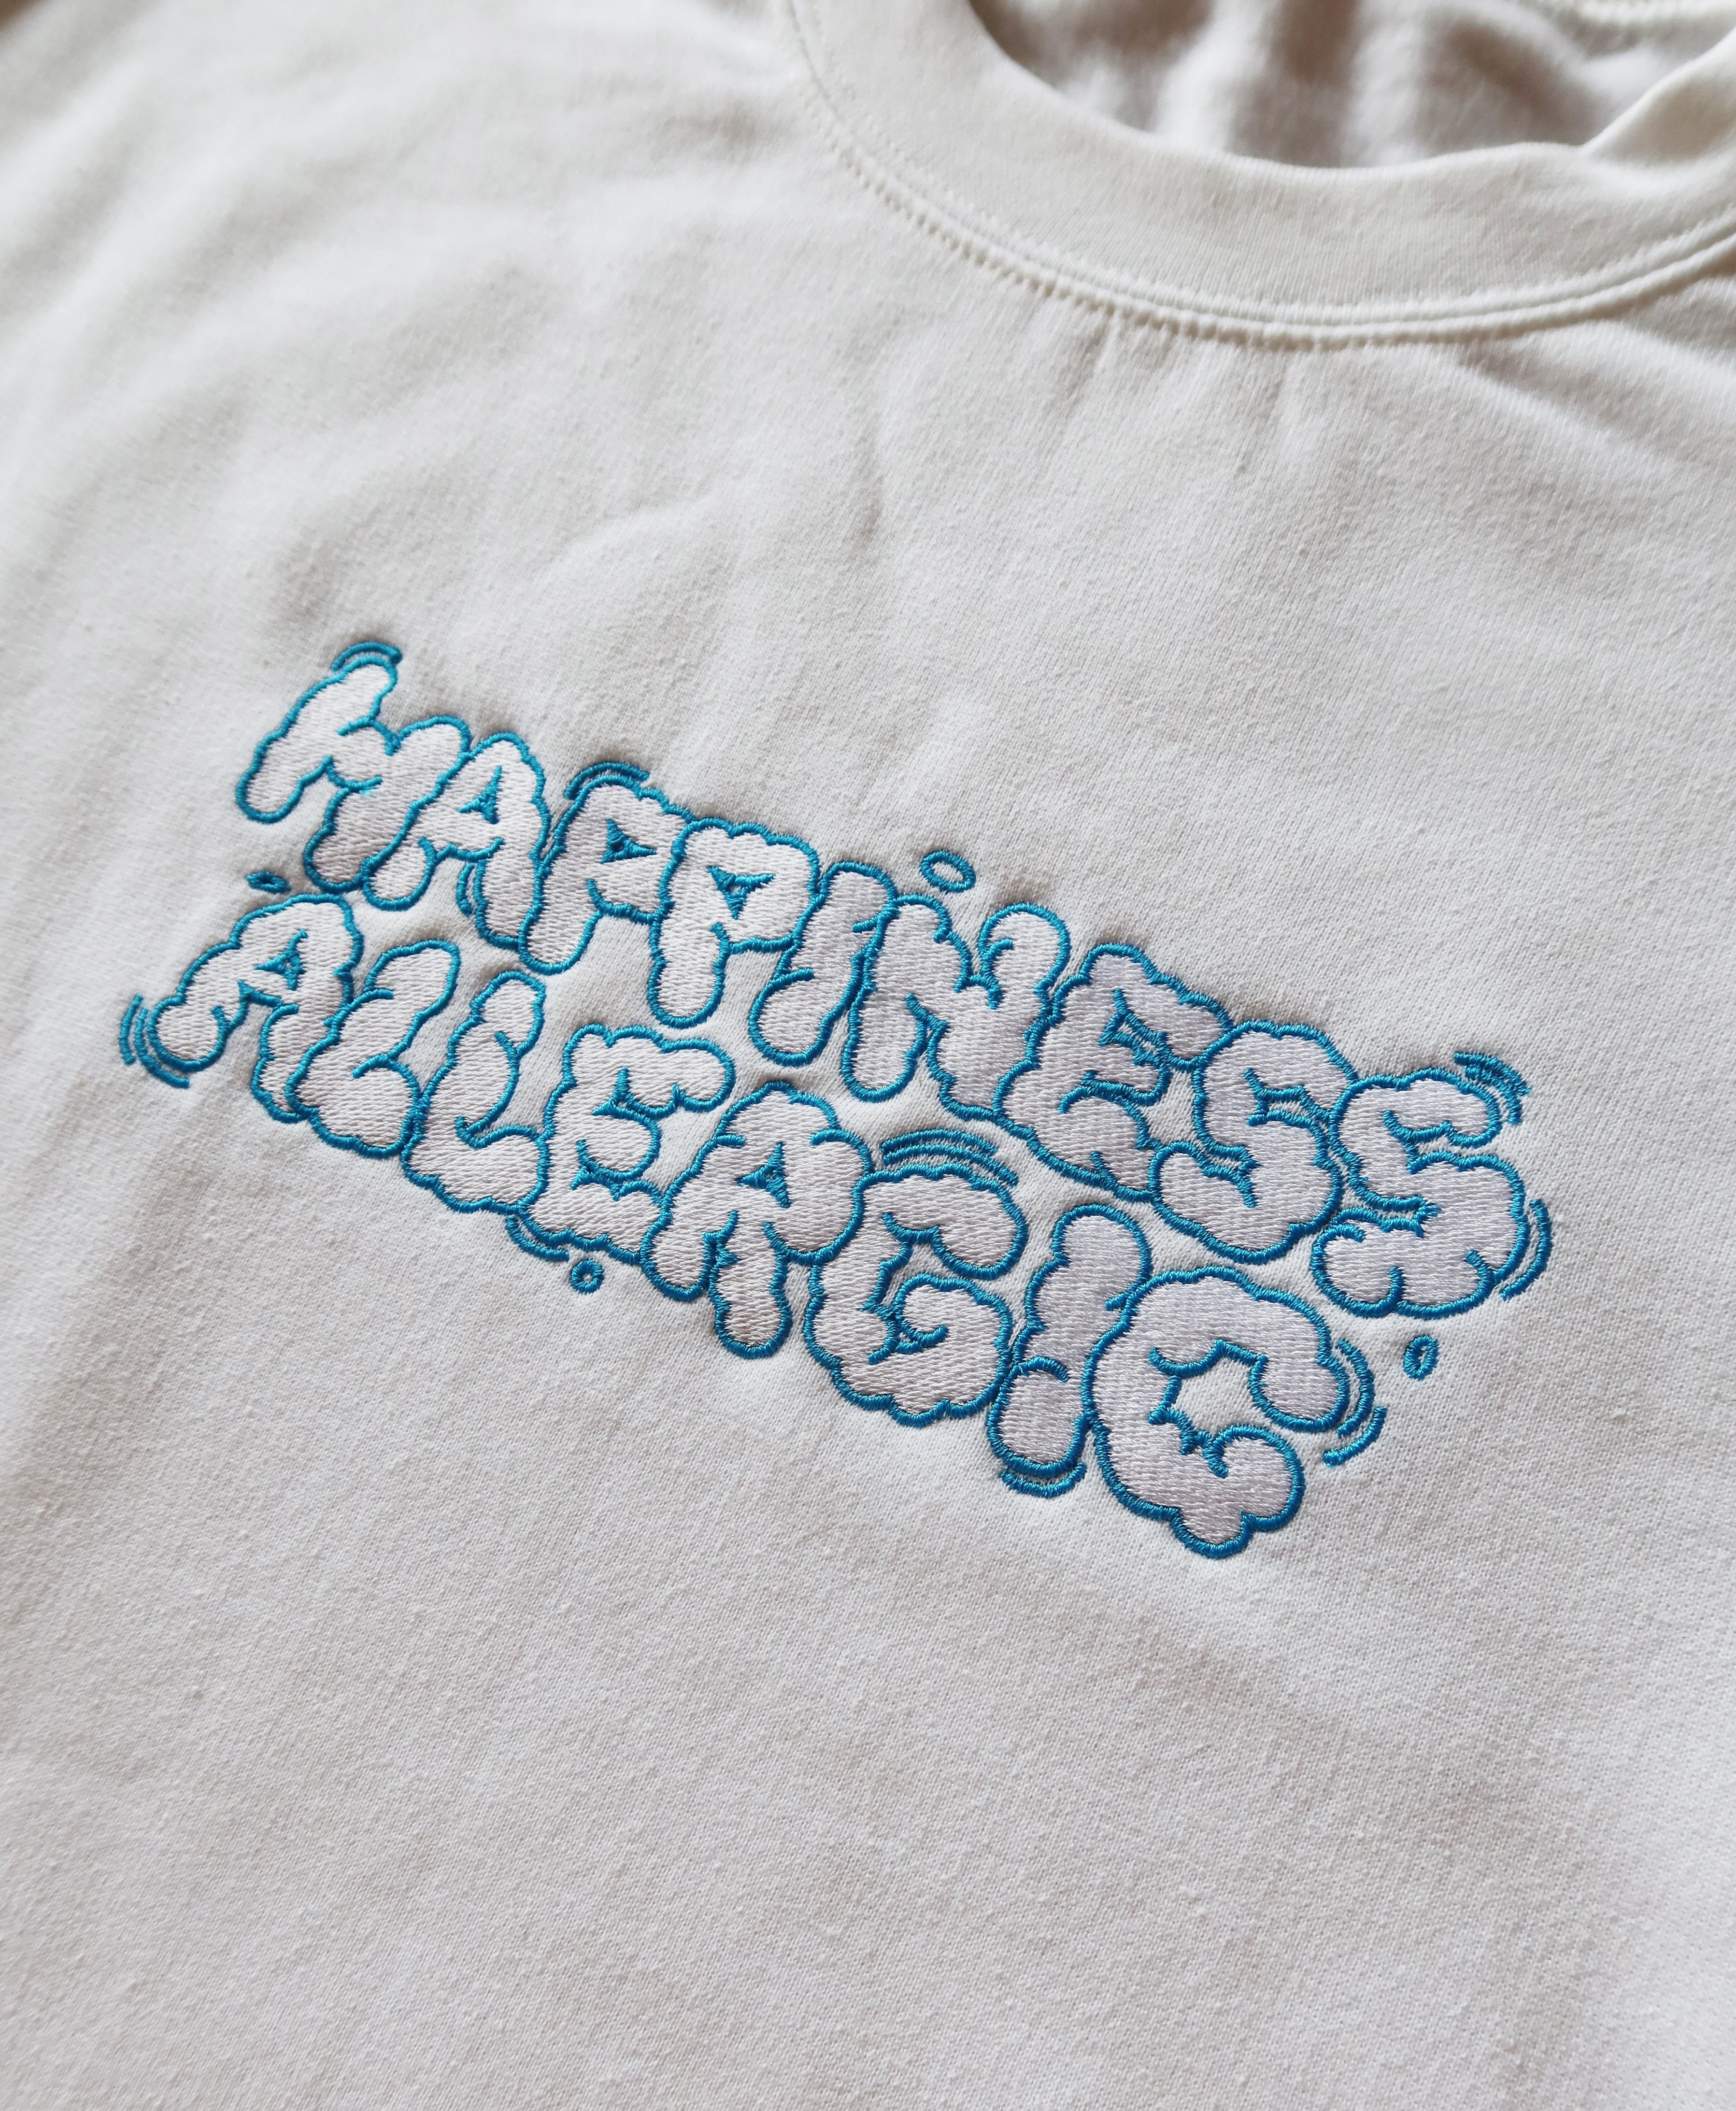 Sweat - Happiness Allergic - White&Blue